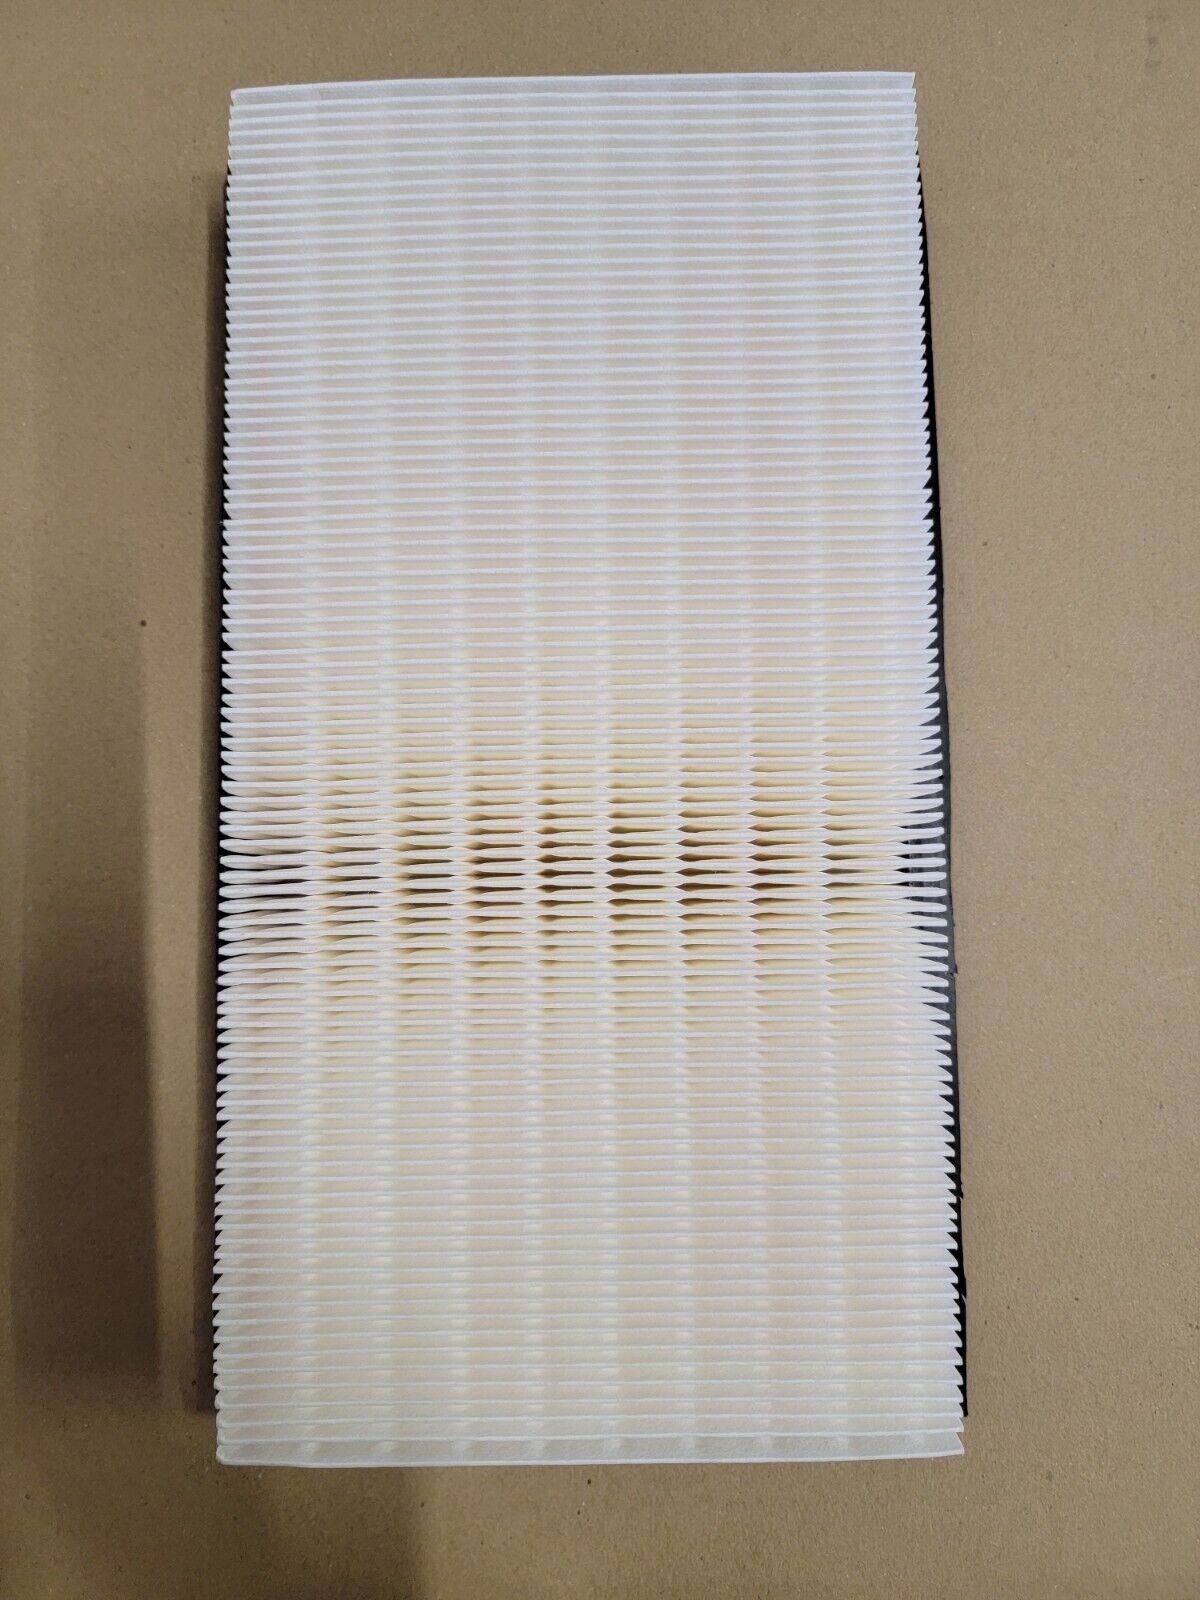 Air Filter 5699 For 2020, 2021, 2020 Lincoln Aviator 3.0L 6Cyl 